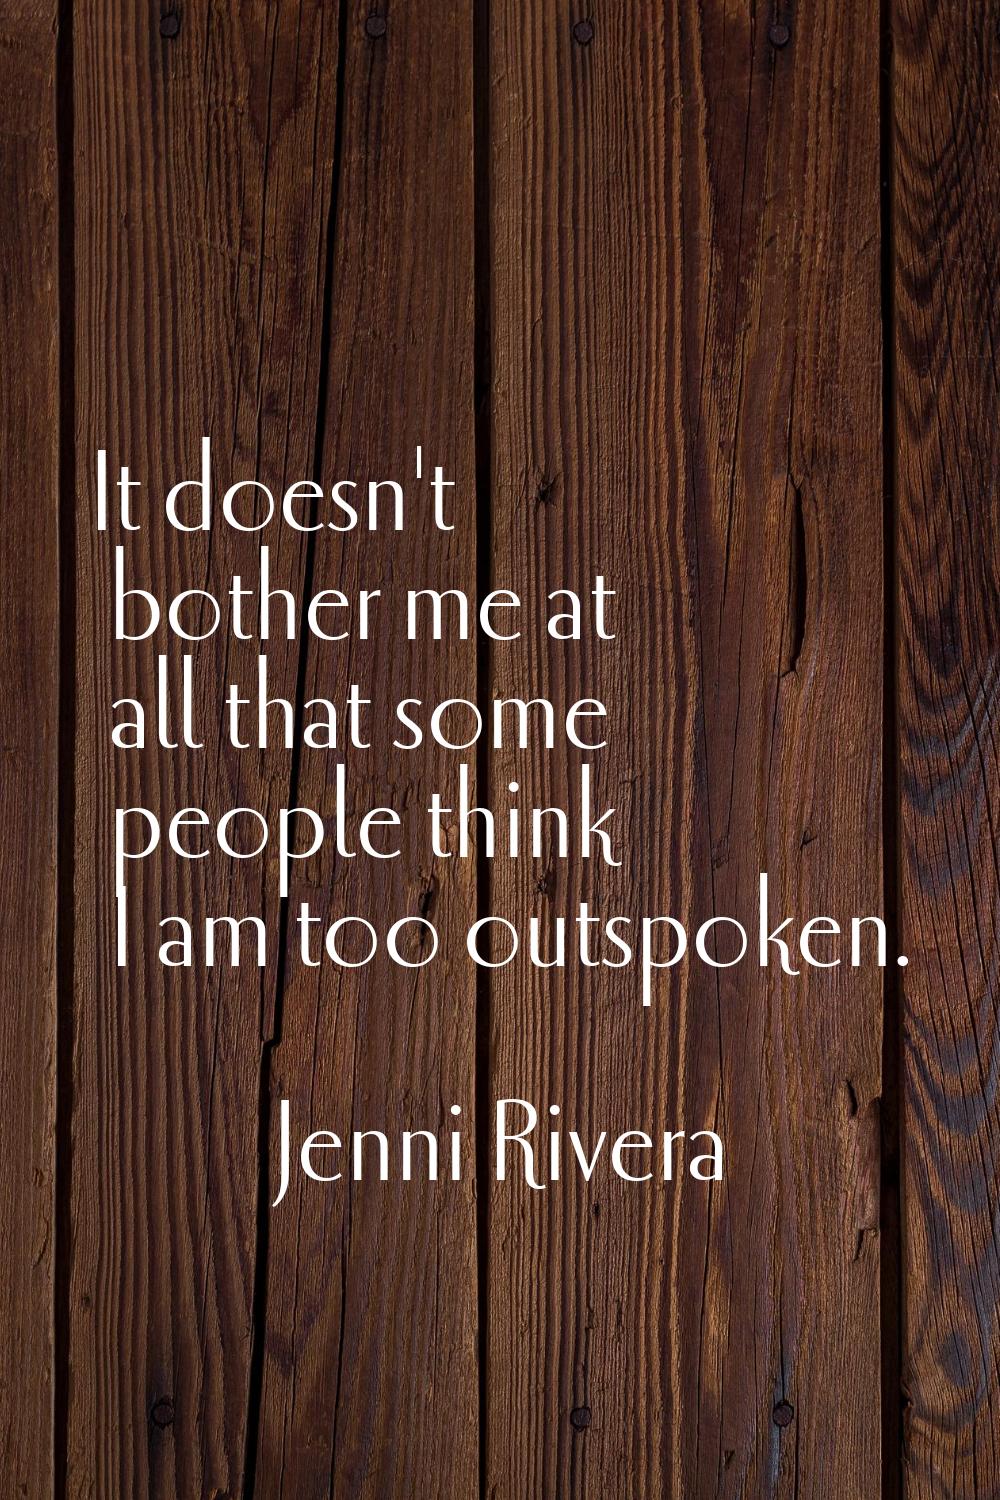 It doesn't bother me at all that some people think I am too outspoken.